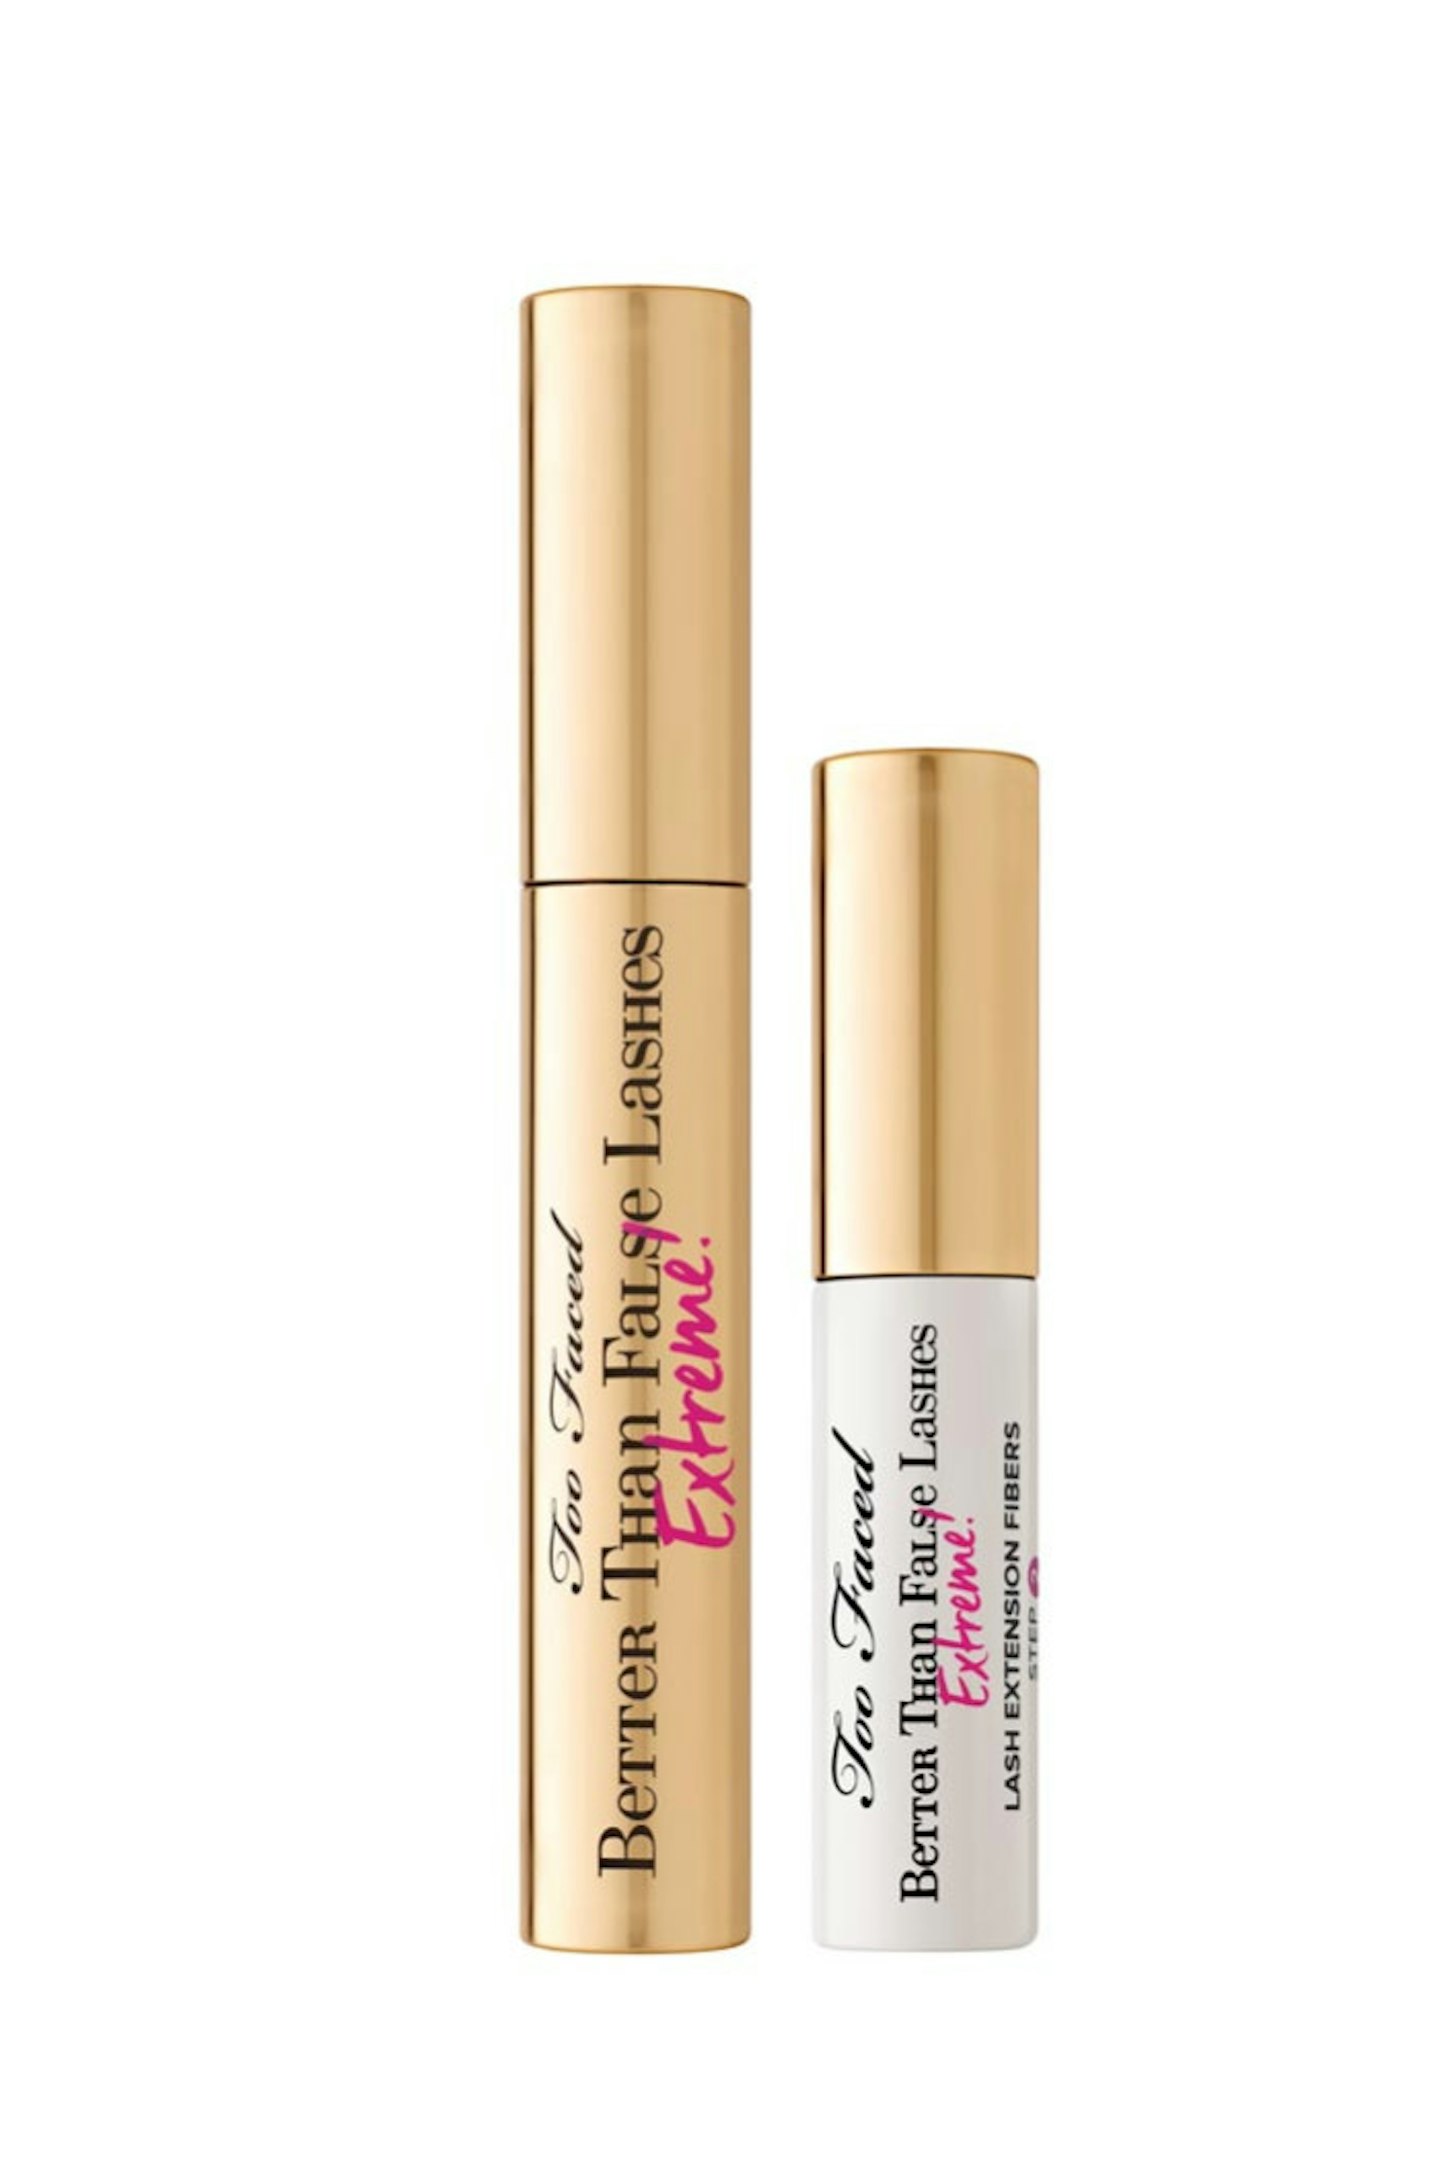 Too Faced Better Than False Lashes Extension Kit, £28.00, Too Faced